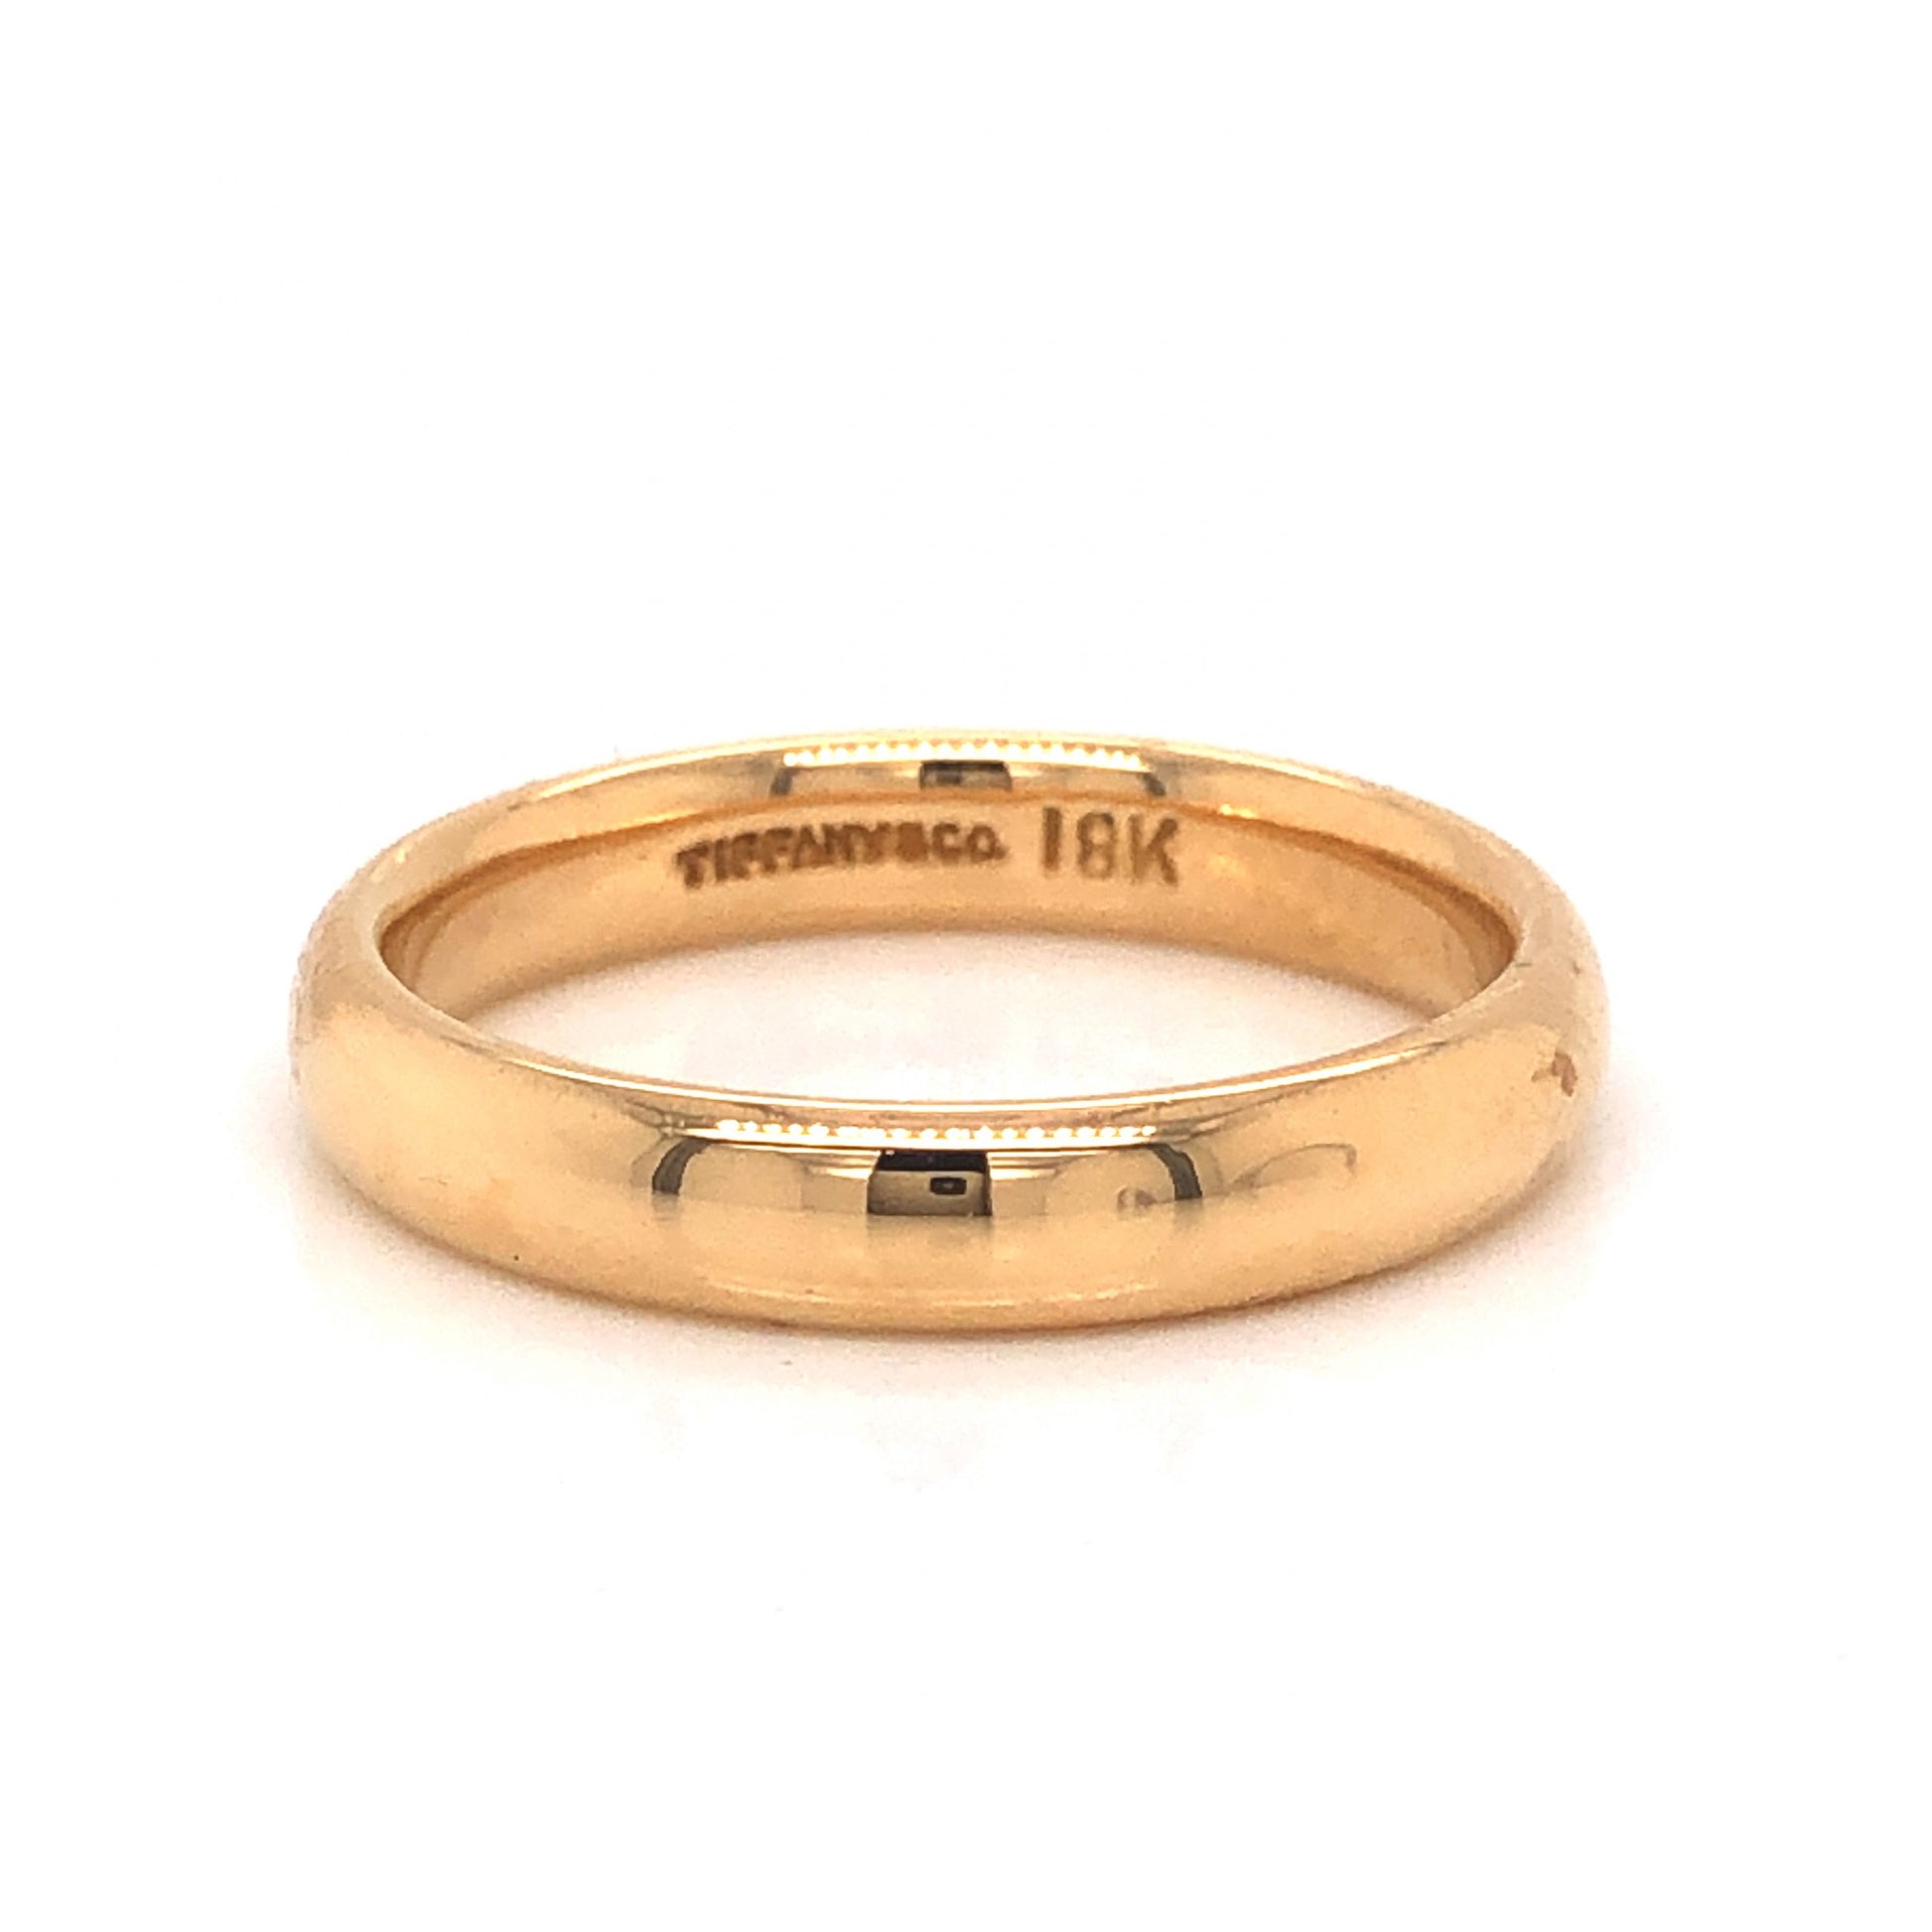 Tiffany & Co. Modern Wedding Band in 18k Yellow GoldComposition: 18 Karat Yellow GoldRing Size: 6.75Total Gram Weight: 4.8 gInscription: Tiffany & Co. 18k